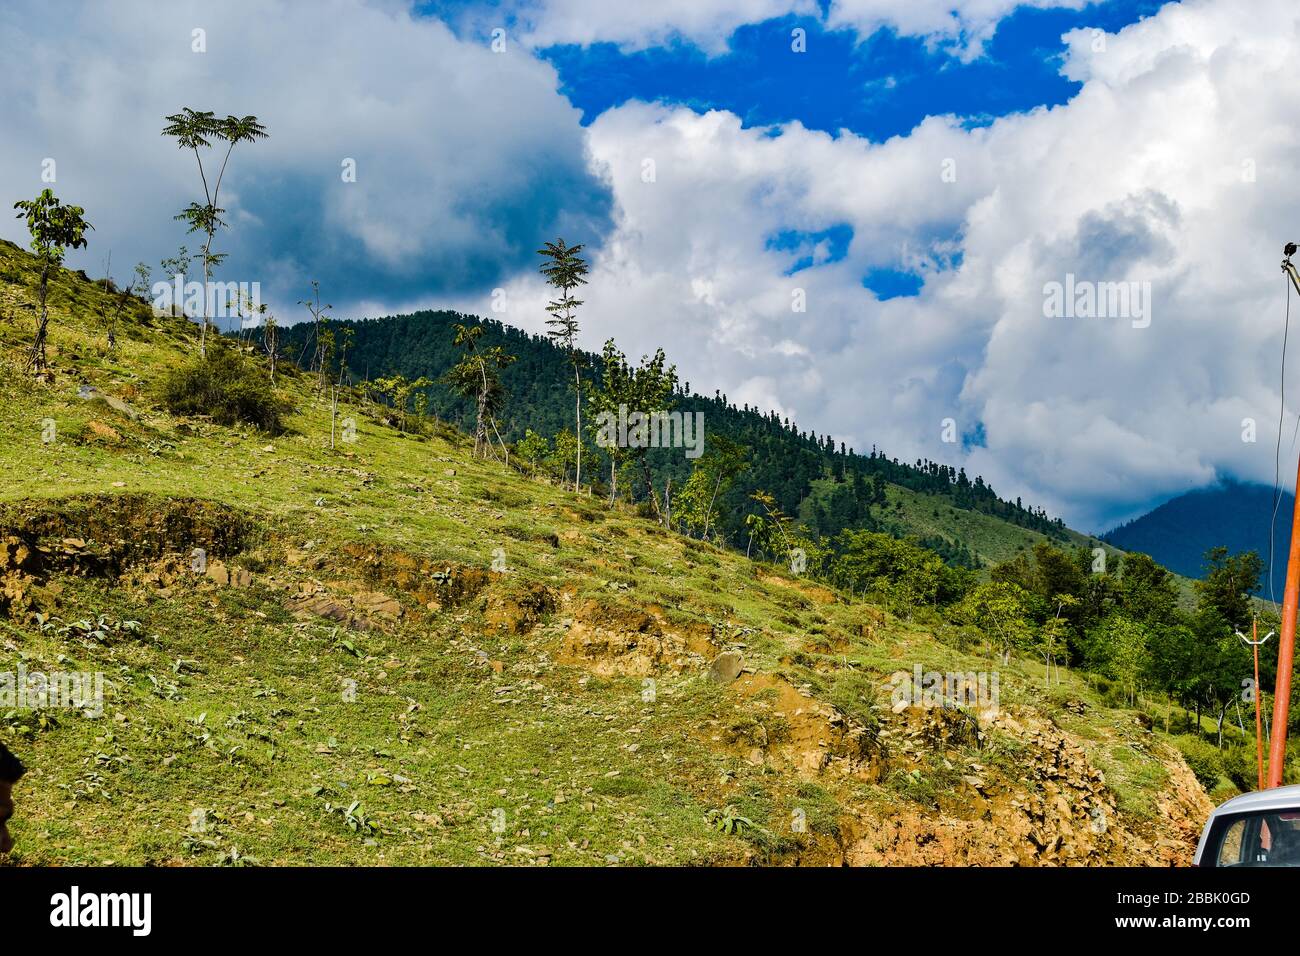 Beautiful shot of a landscape out side a village with lush green trees of willow,pine and walnut near Pahalgam Kashmir,India. Stock Photo